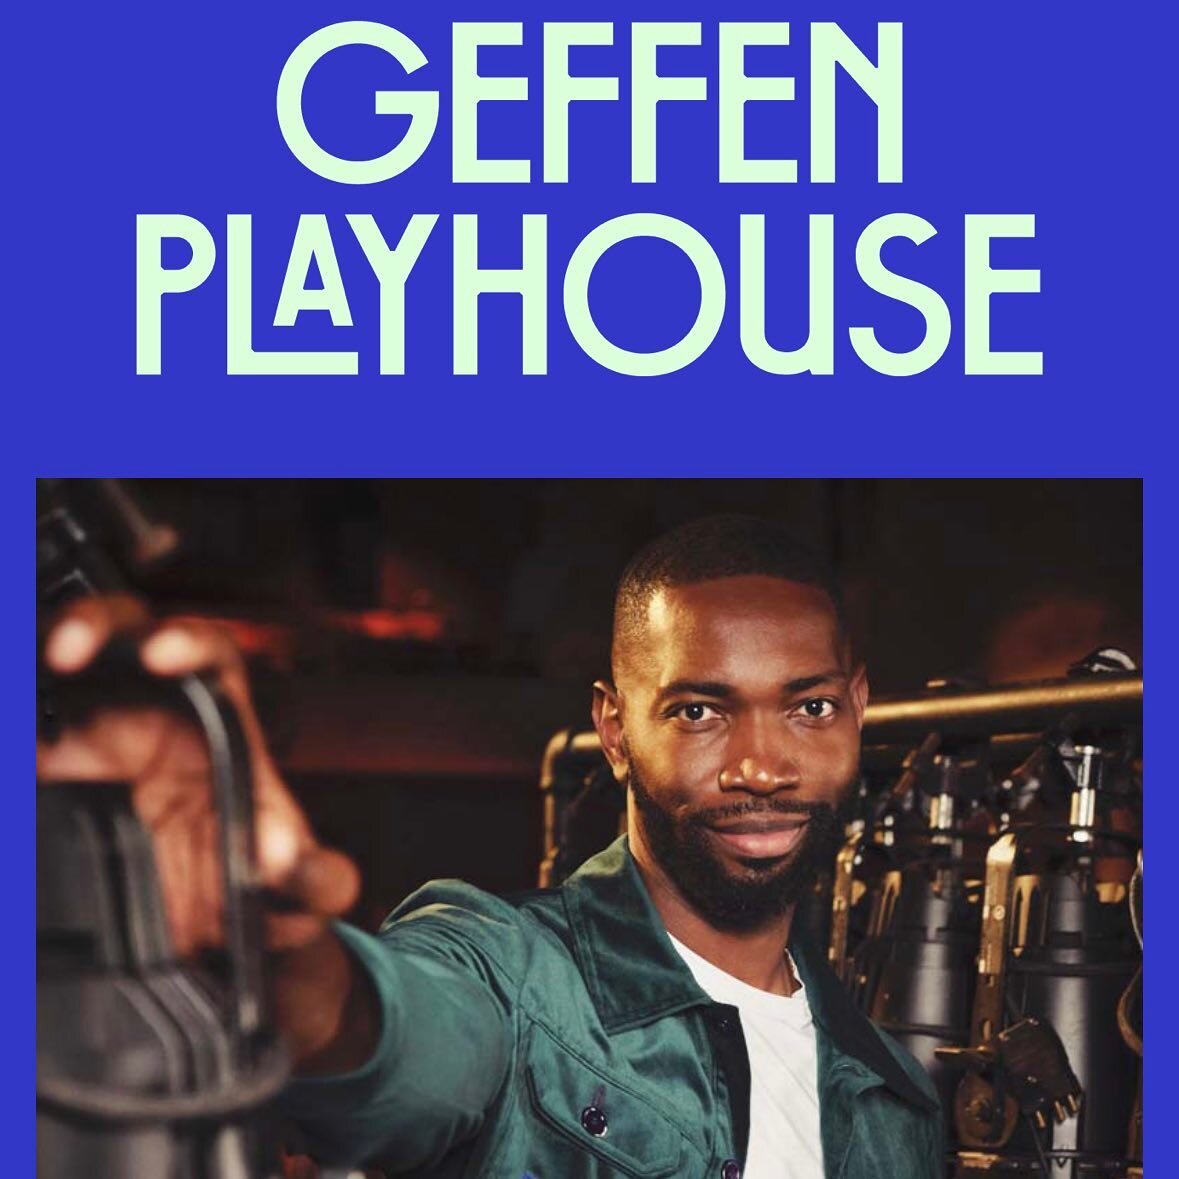 We are incredibly proud of our friend and past collaborator, Tarell Alvin McCraney, on his new appointment as @geffenplayhouse&rsquo;s Artistic Director! His works are inspiring and his vision is influential. We can&rsquo;t wait to see what he has in